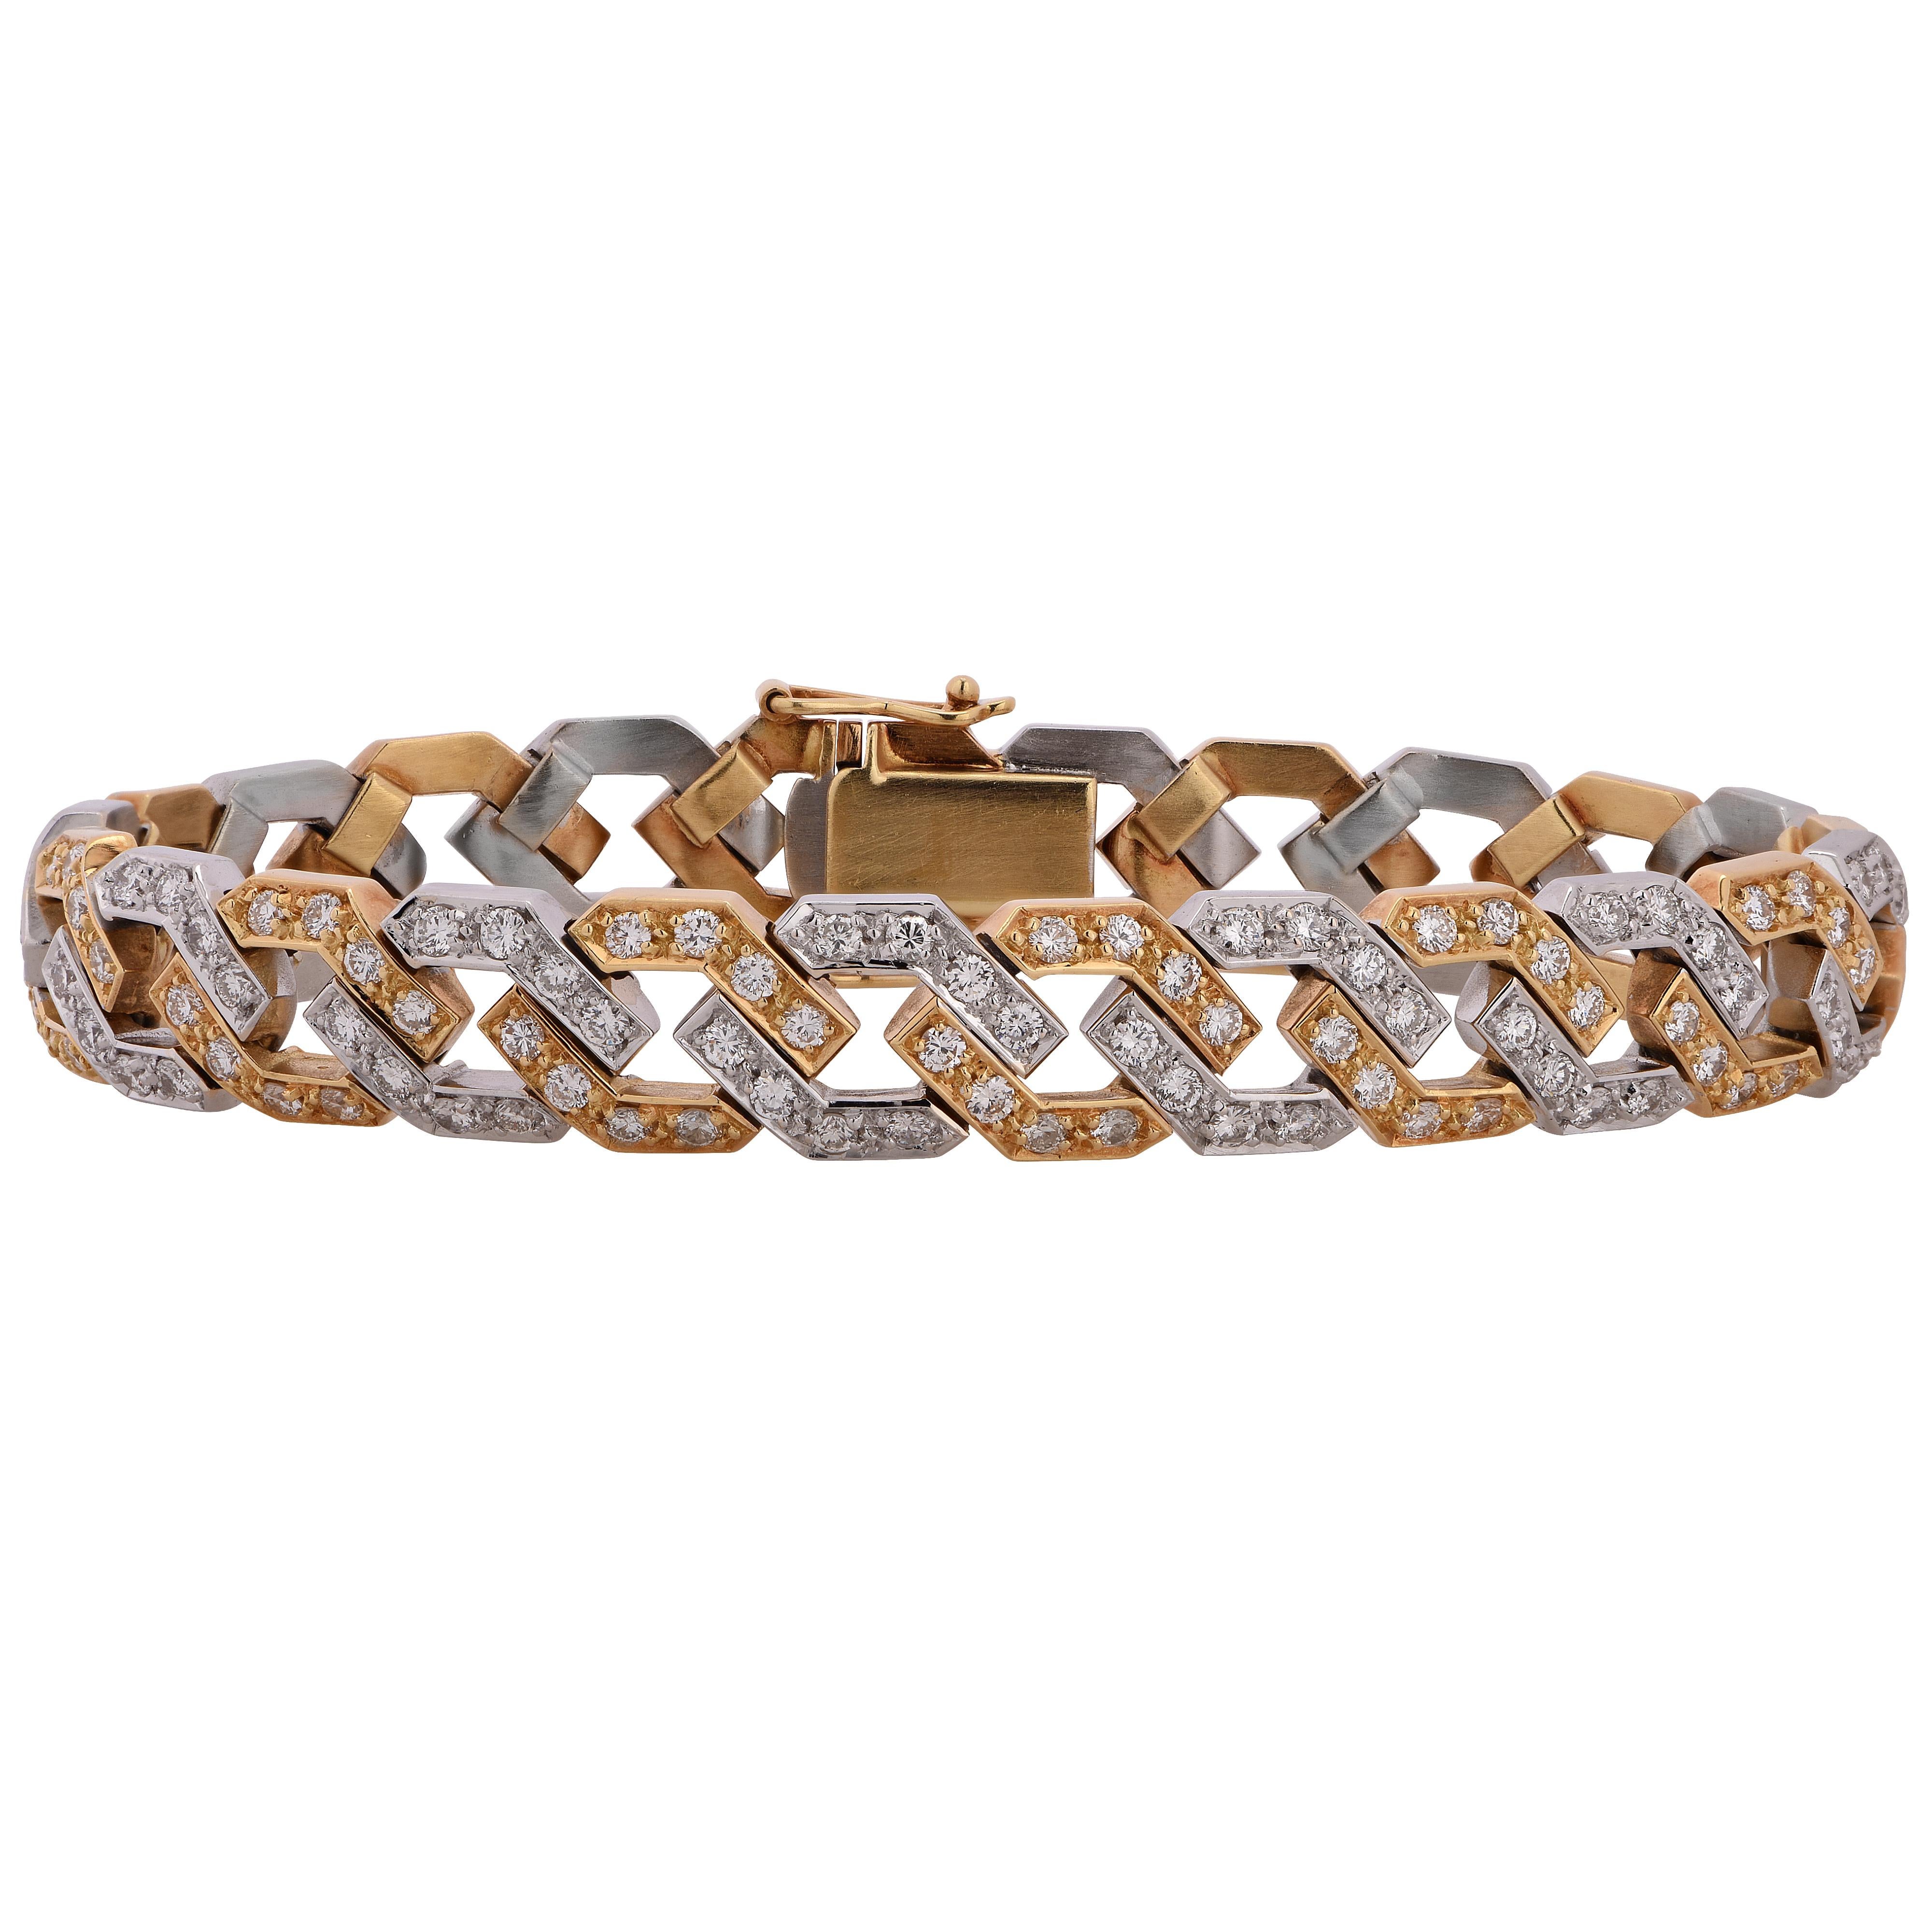 Striking bracelet crafted in 18k white and yellow gold featuring 192 round brilliant cut diamonds weighing 4.83 carats total, G color VS clarity. Diamond encrusted white gold and yellow gold links alternate and interlock to create a piece that is